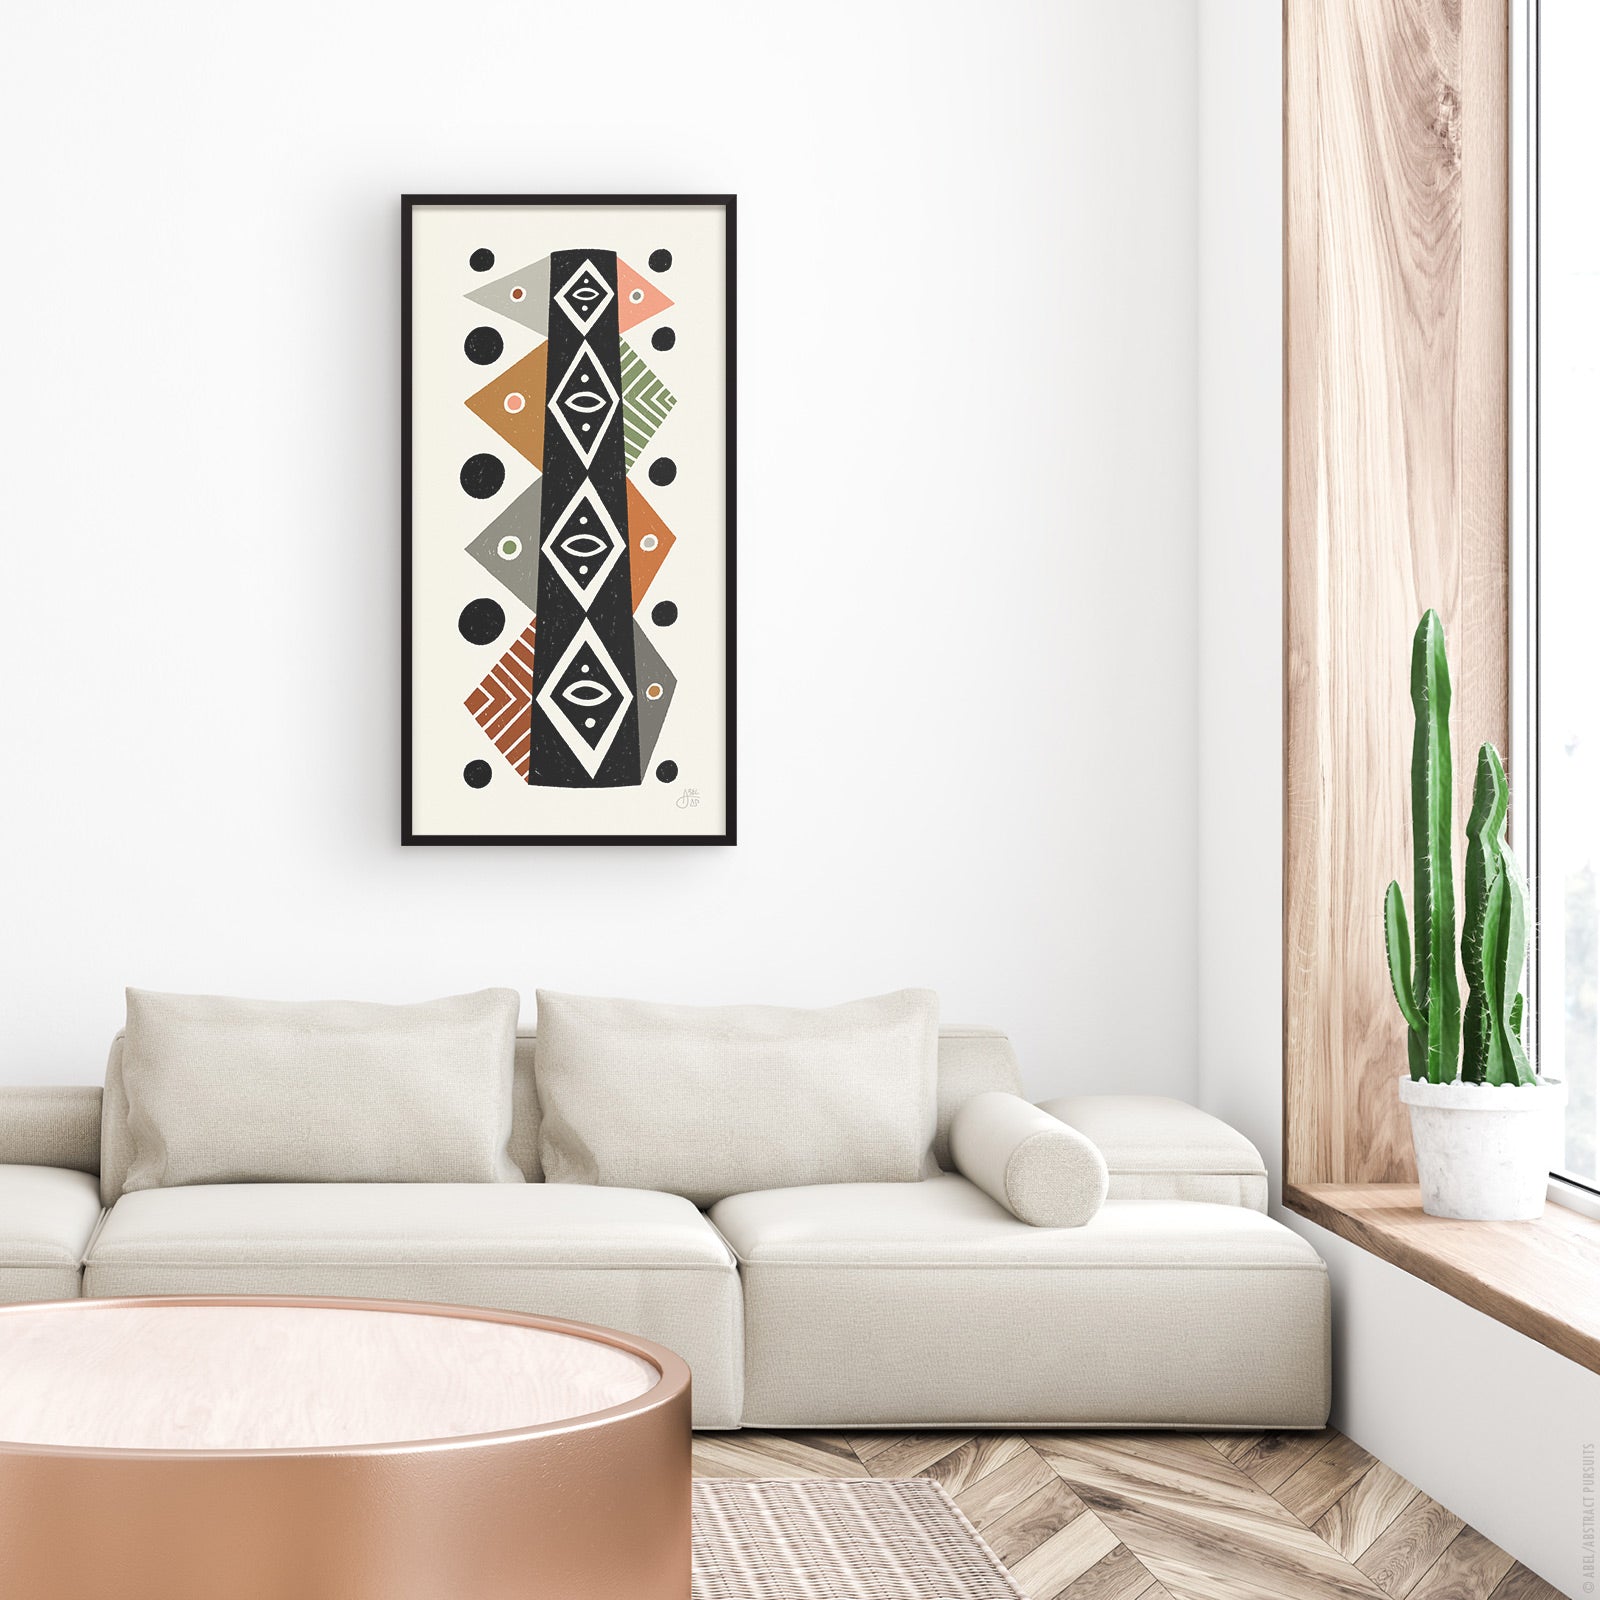 Framed Mid-century inspired totem design and fine art print on bamboo paper on wall by Erik Abel